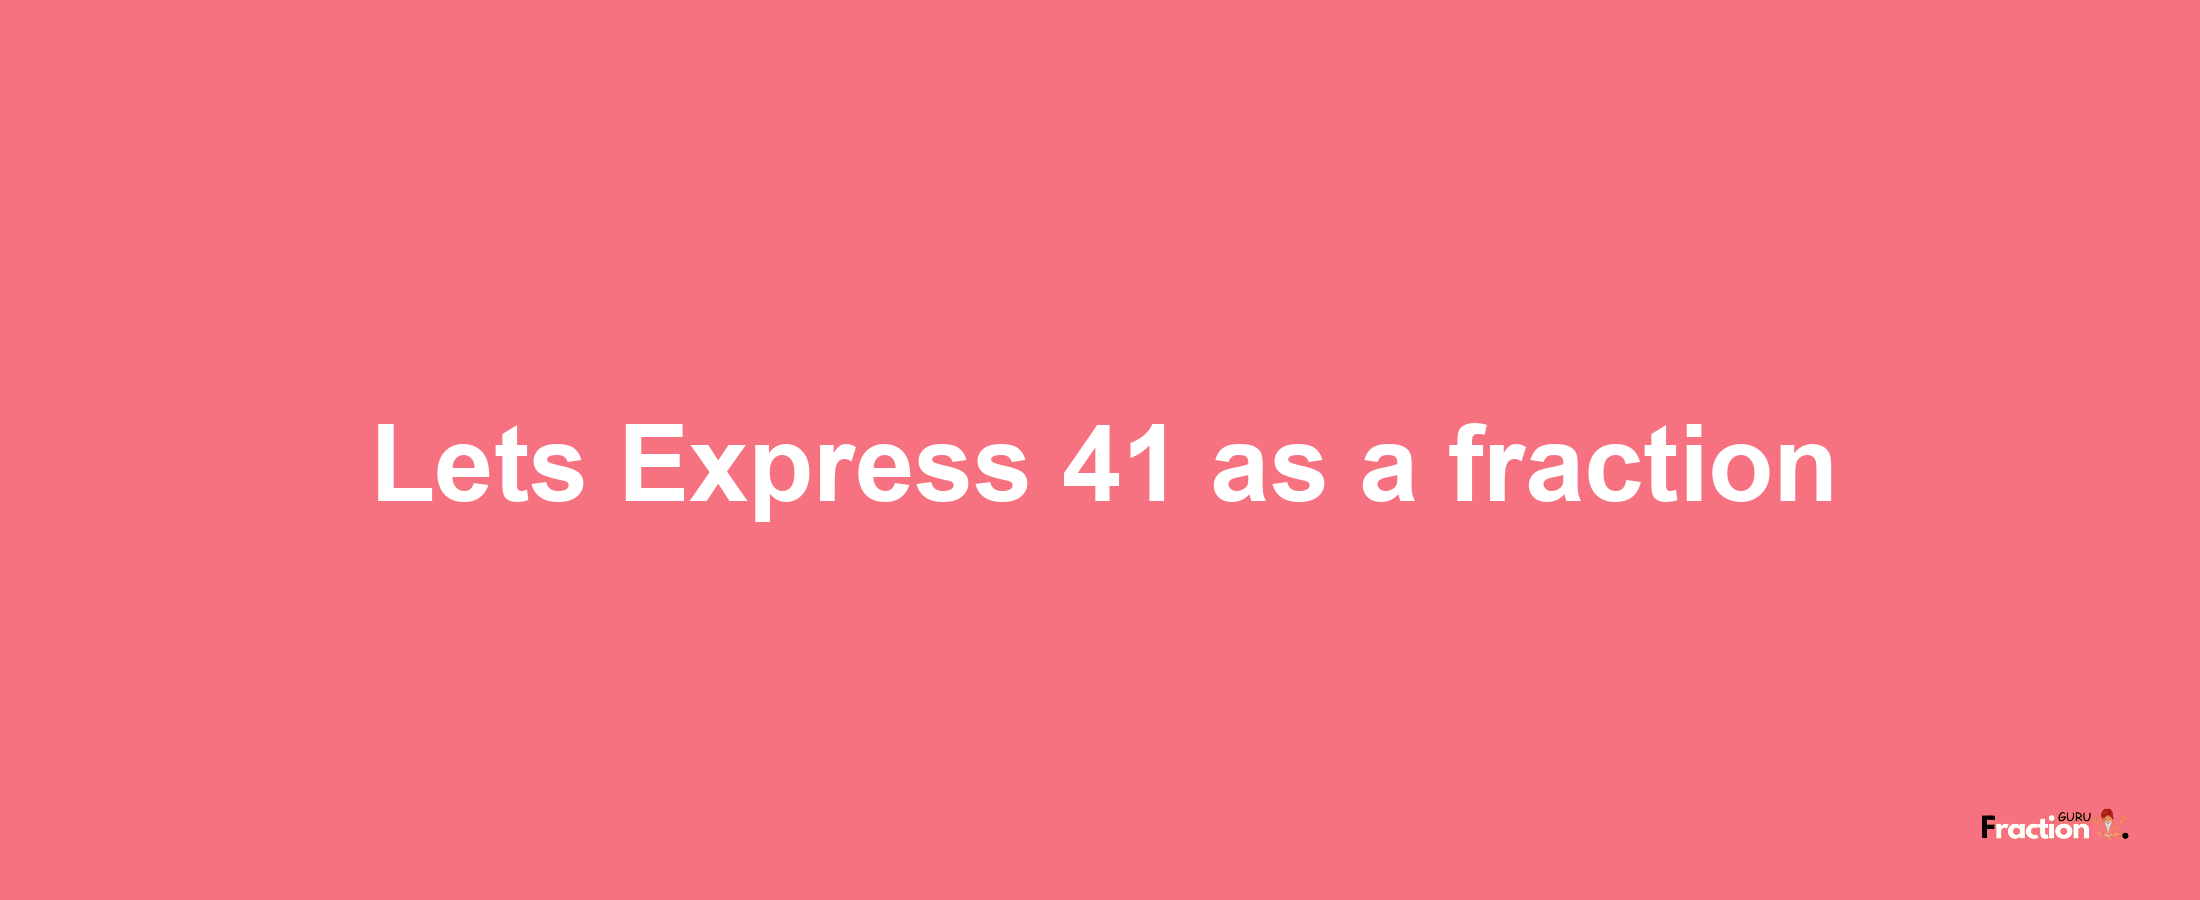 Lets Express 41 as afraction